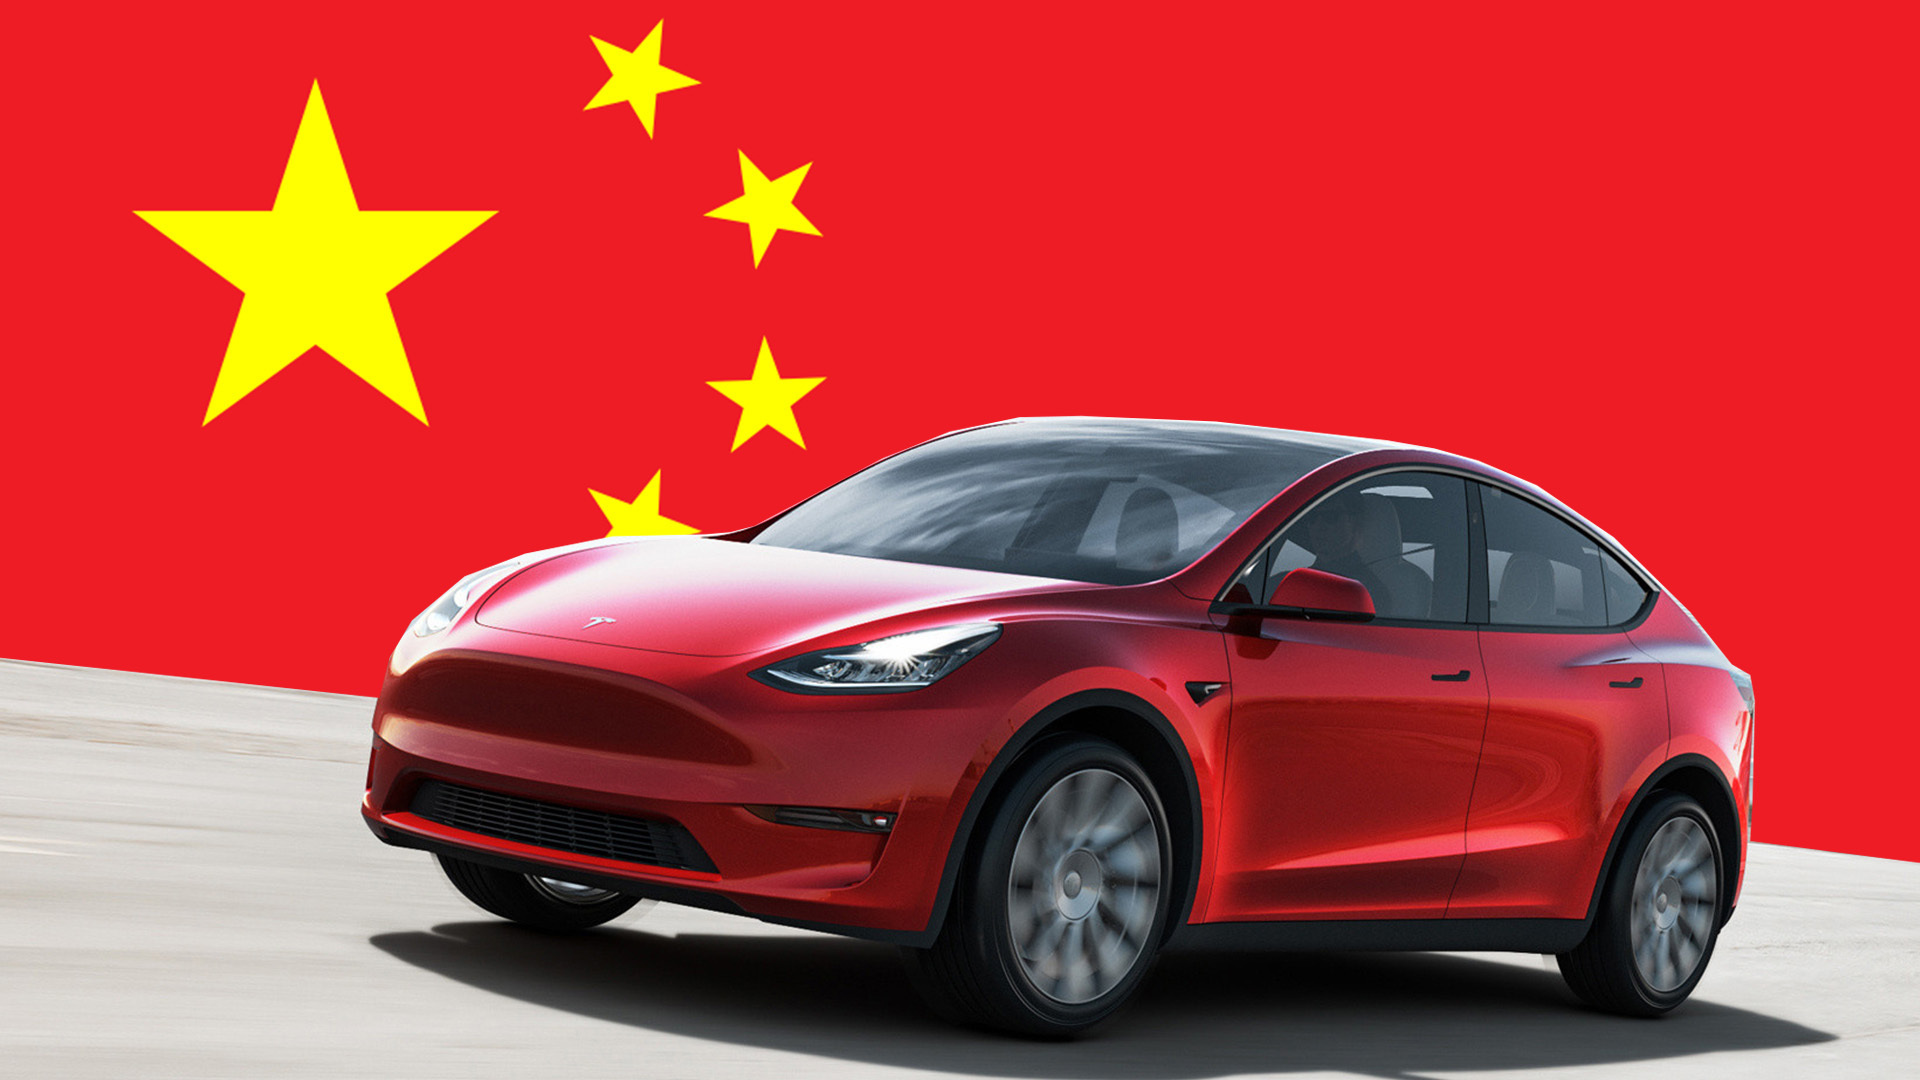 Tesla’s Sales Declined by Massive 18% Due to China-Made Electric Vehicles